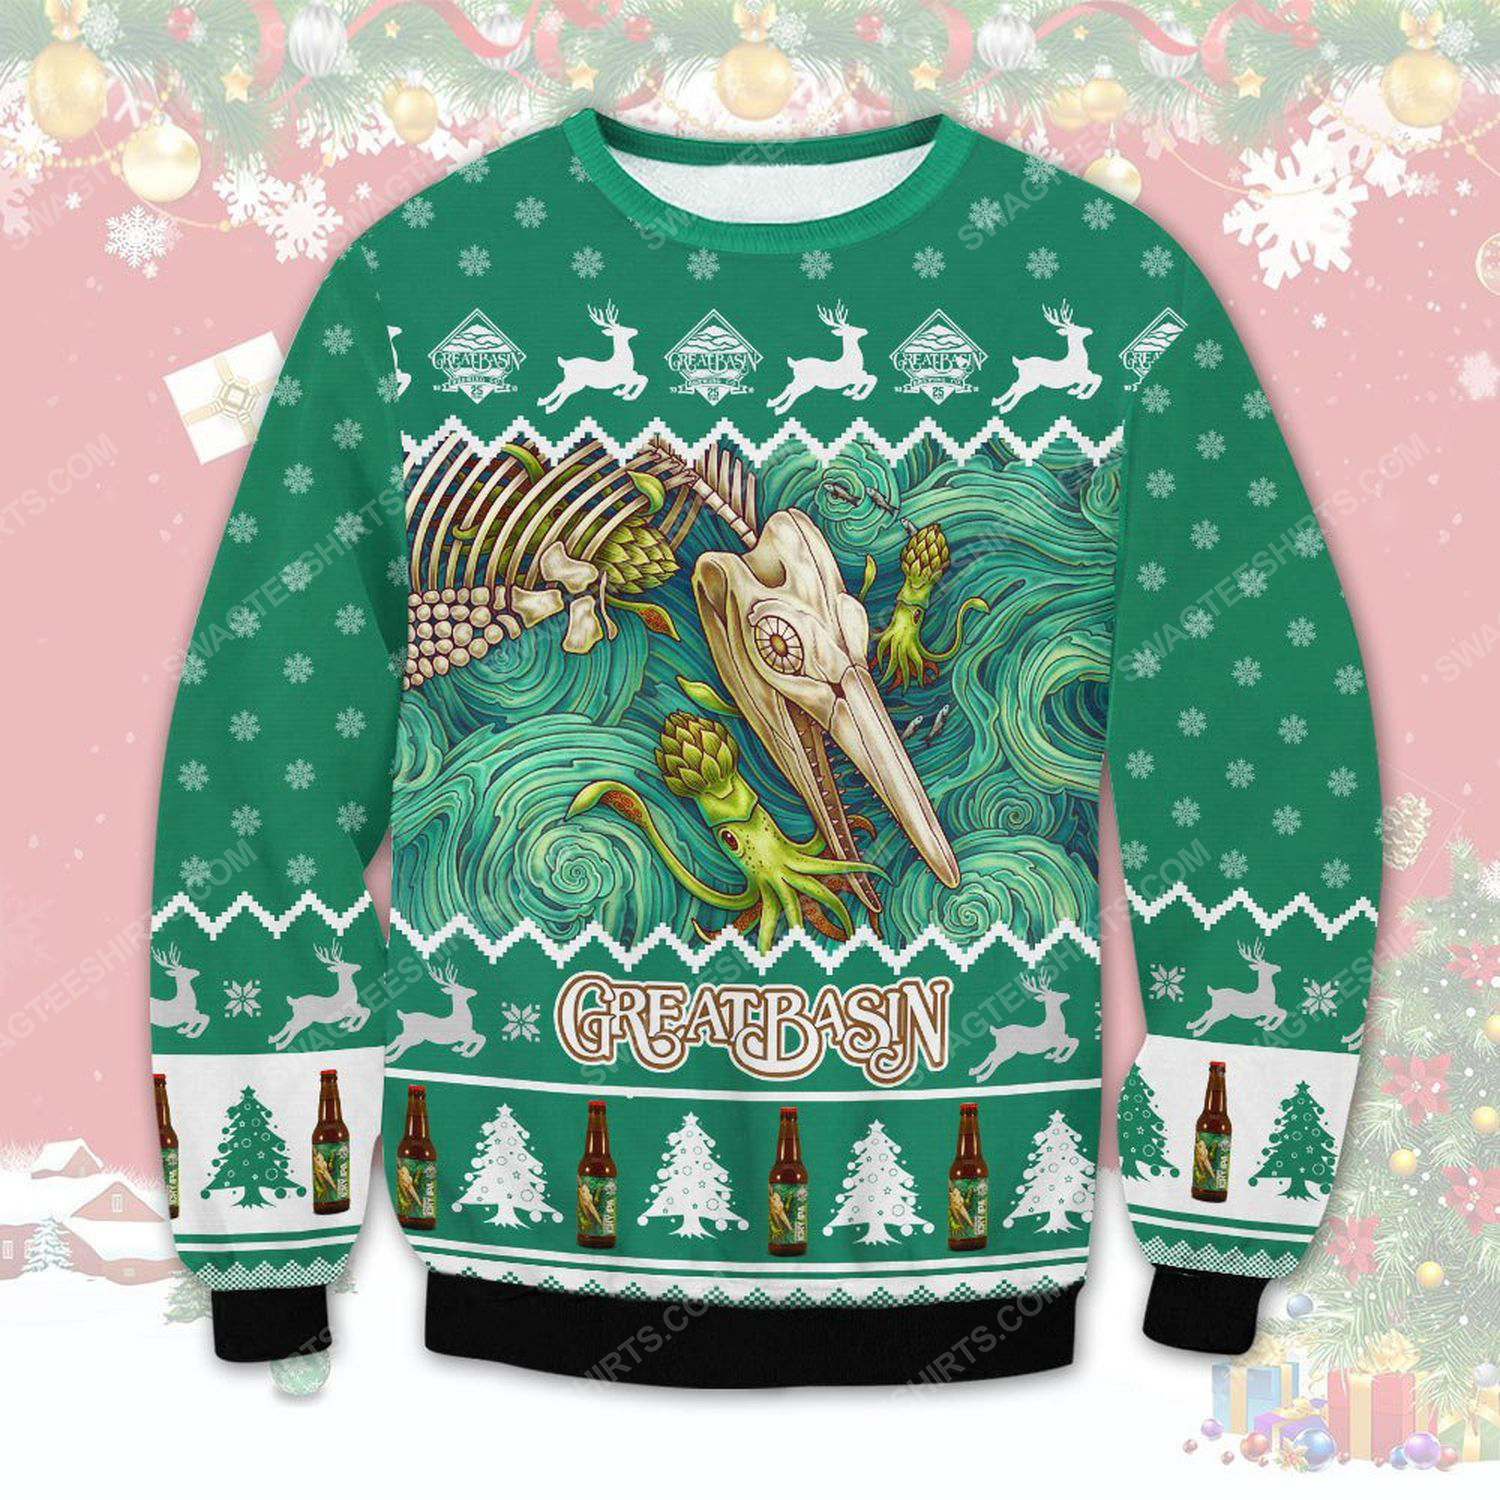 Great basin brewing company ugly christmas sweater